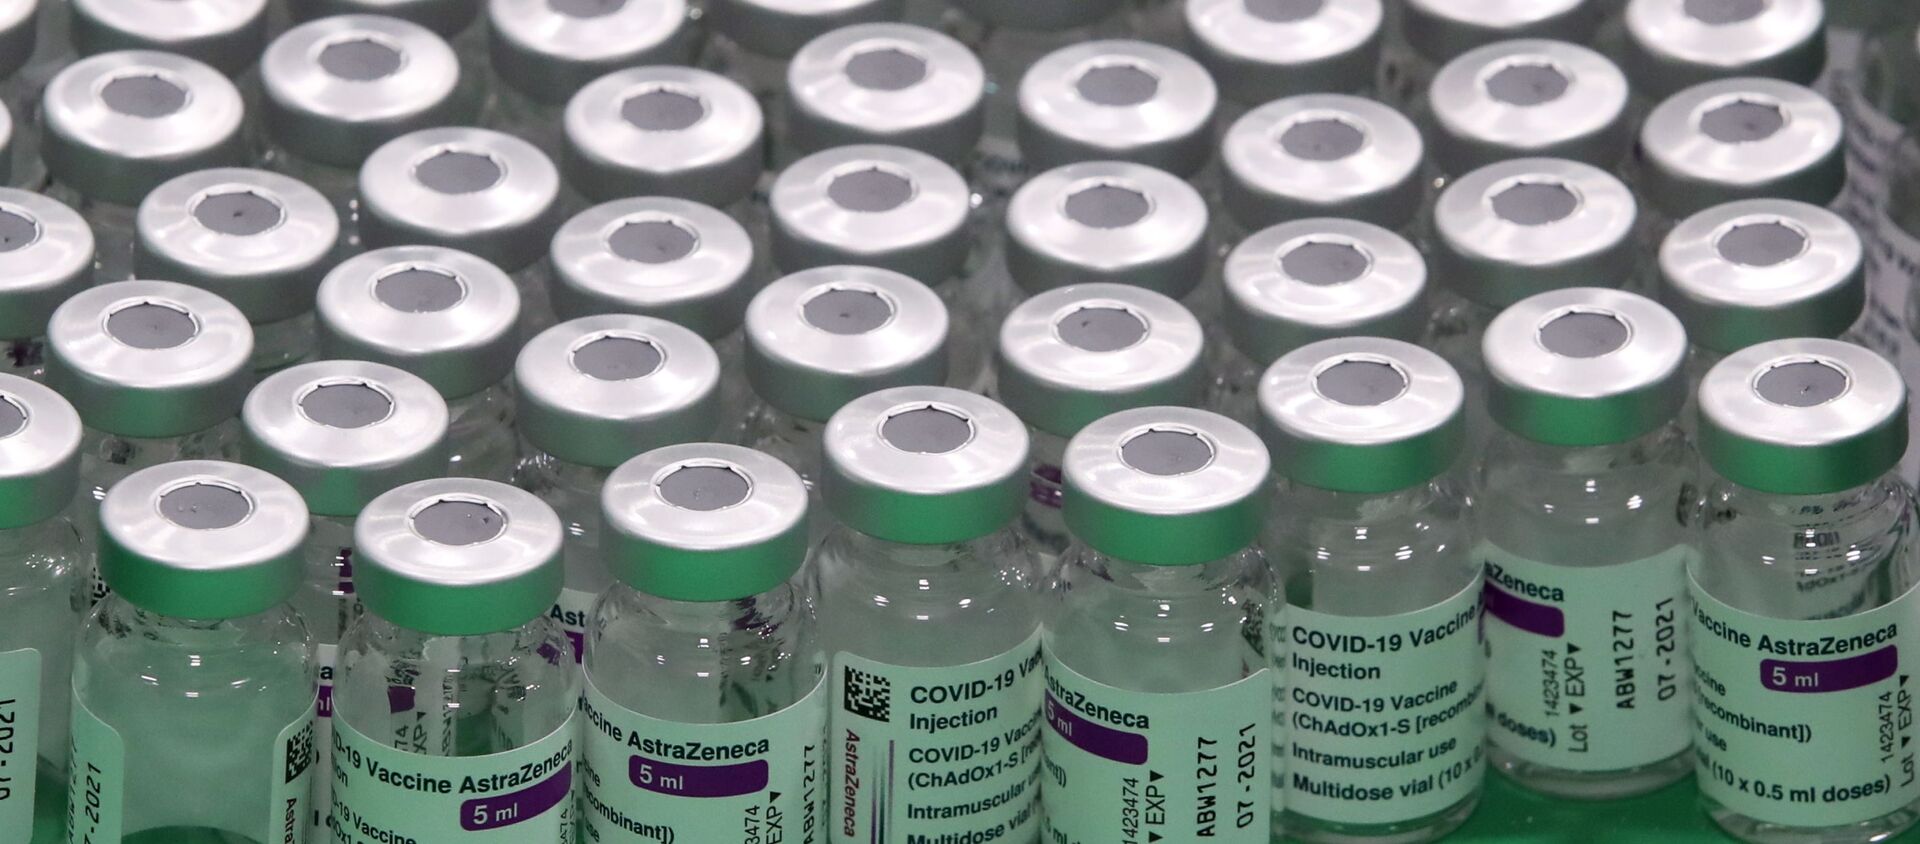 Empty vials of Oxford/AstraZeneca's COVID-19 vaccine are seen at a vaccination centre in Antwerp, Belgium, 18 March 2021. REUTERS/Yves Herman - Sputnik International, 1920, 07.05.2021